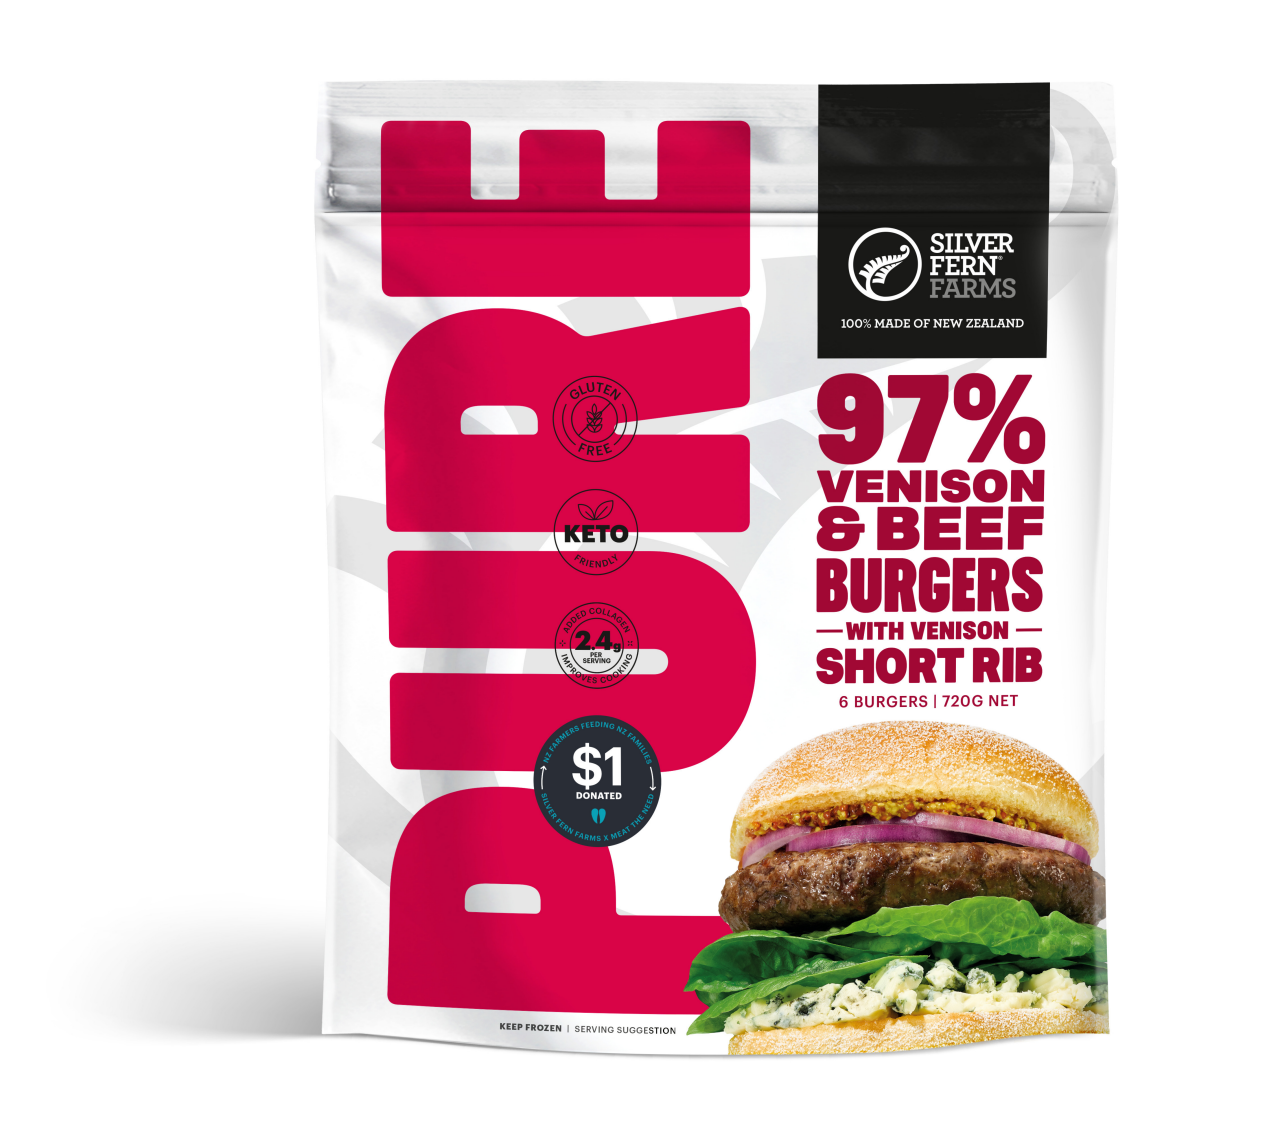 Venison and Beef Pure Burger Packaging